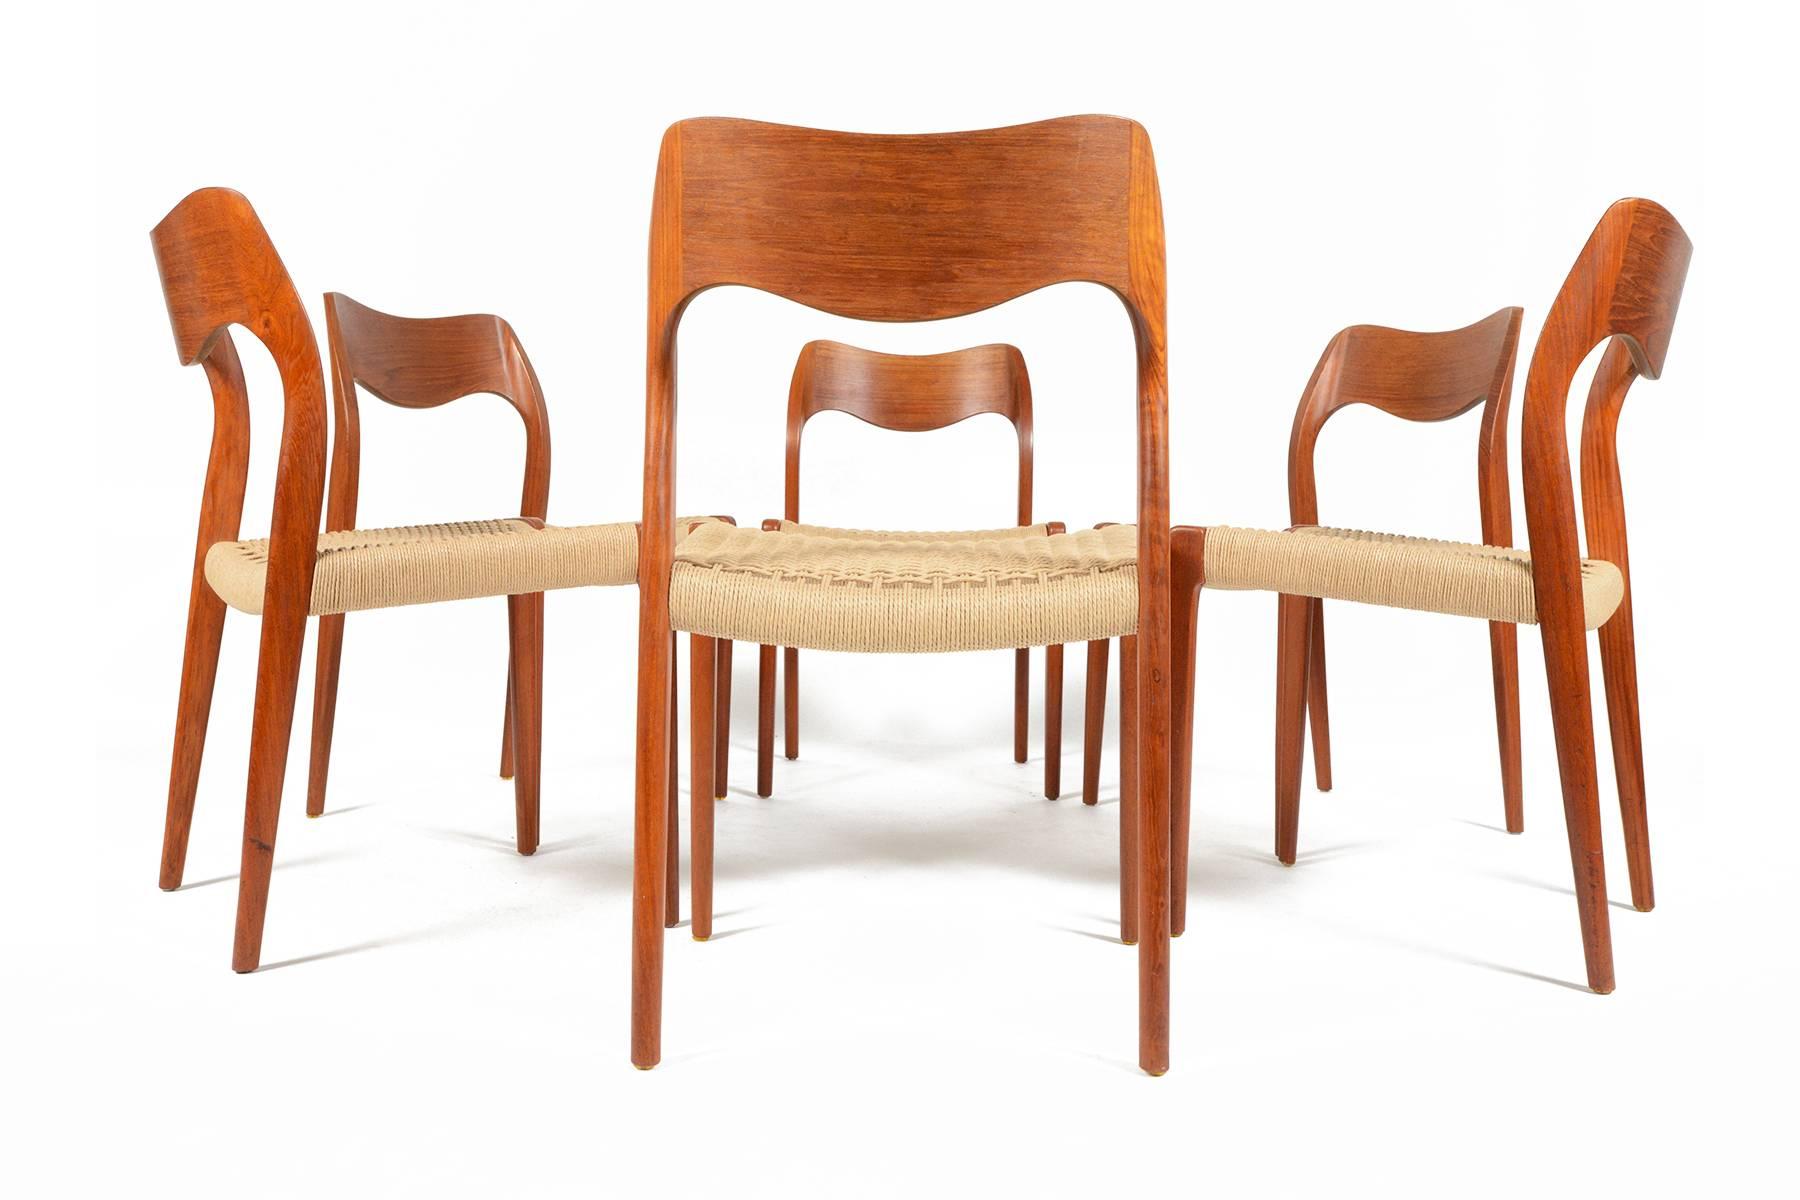 This set of six Møller model 71 dining chairs in teak are a rare find. Designed in the 1960s by Niels Otto Møller for J. L. Møller, this set is crafted in solid teak. Seats have recently been recorded in paper cord. Frames are in excellent original